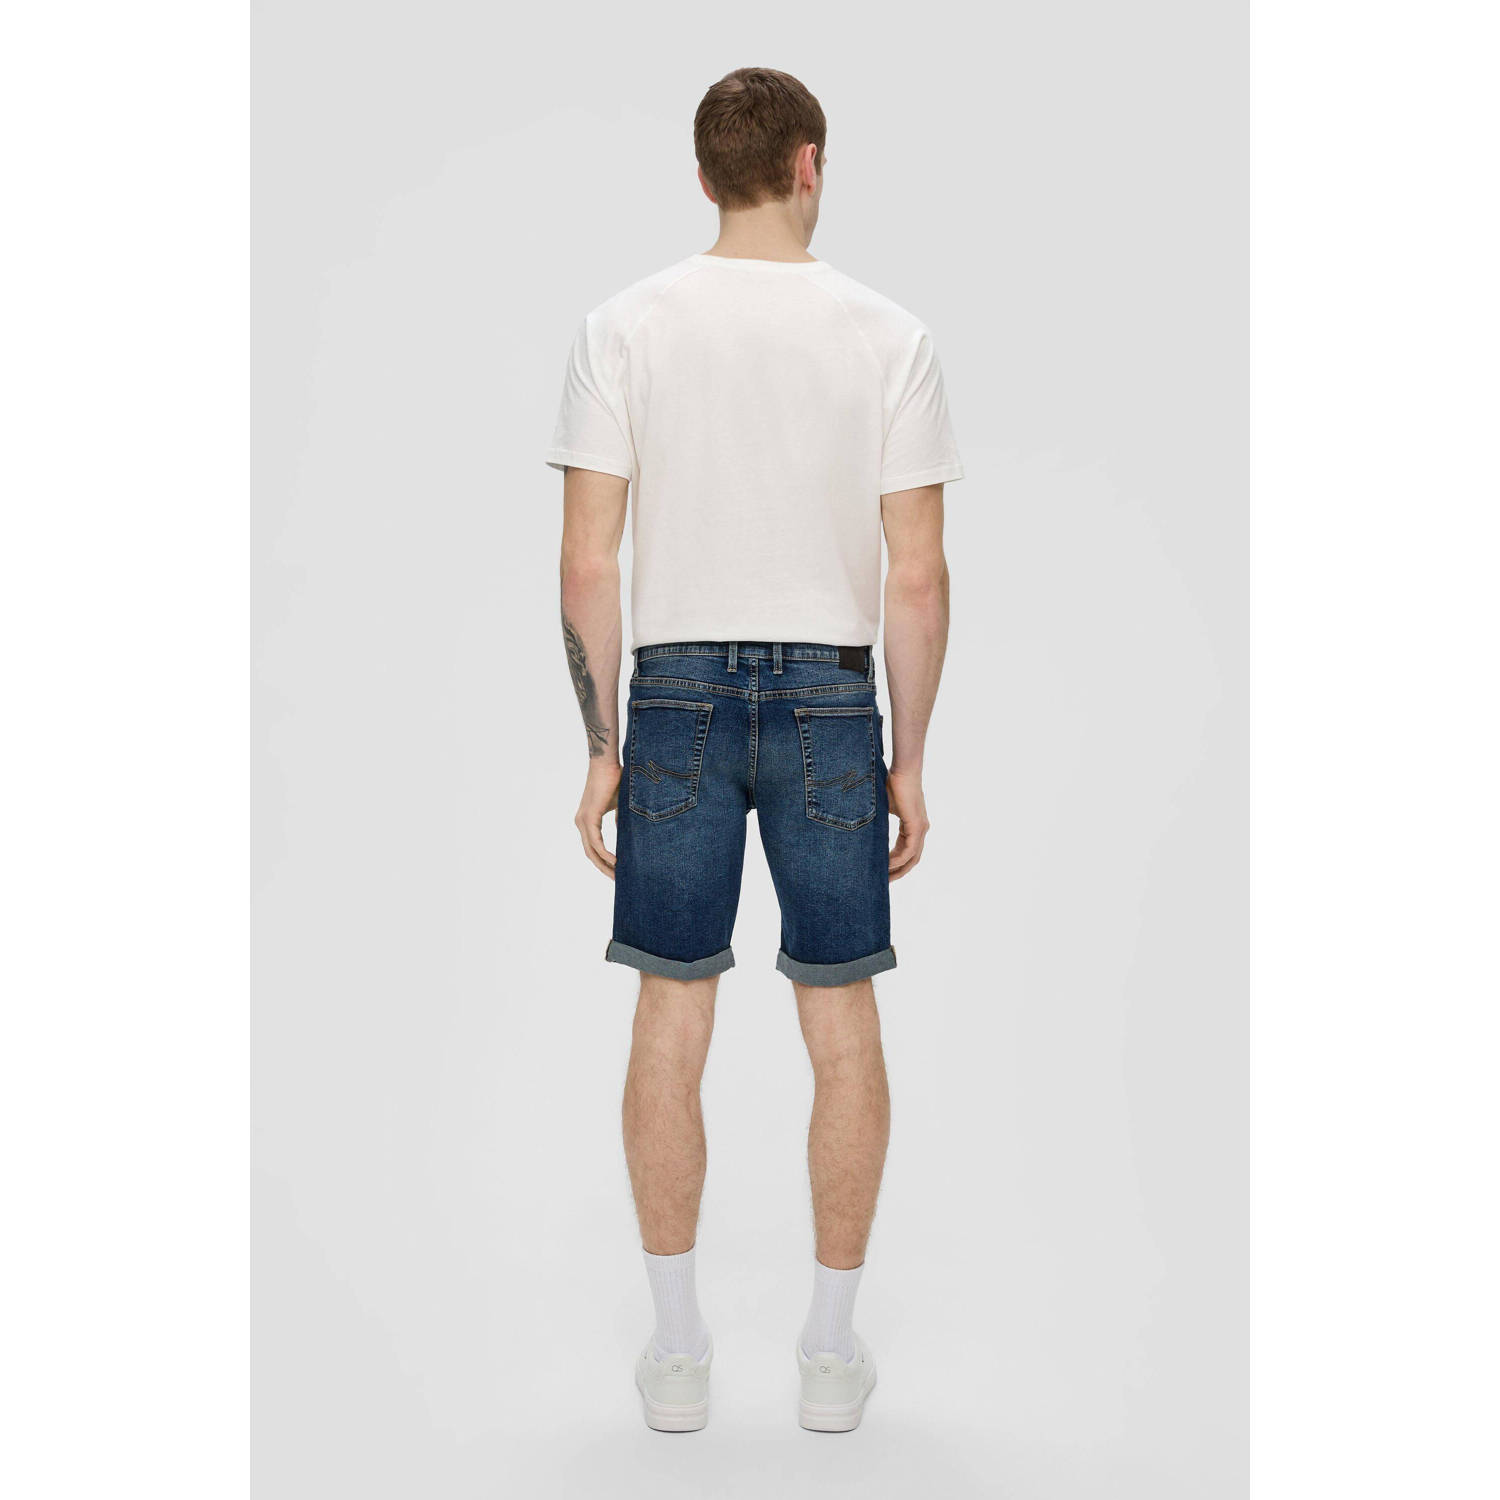 Q S by s.Oliver regular fit short blauw